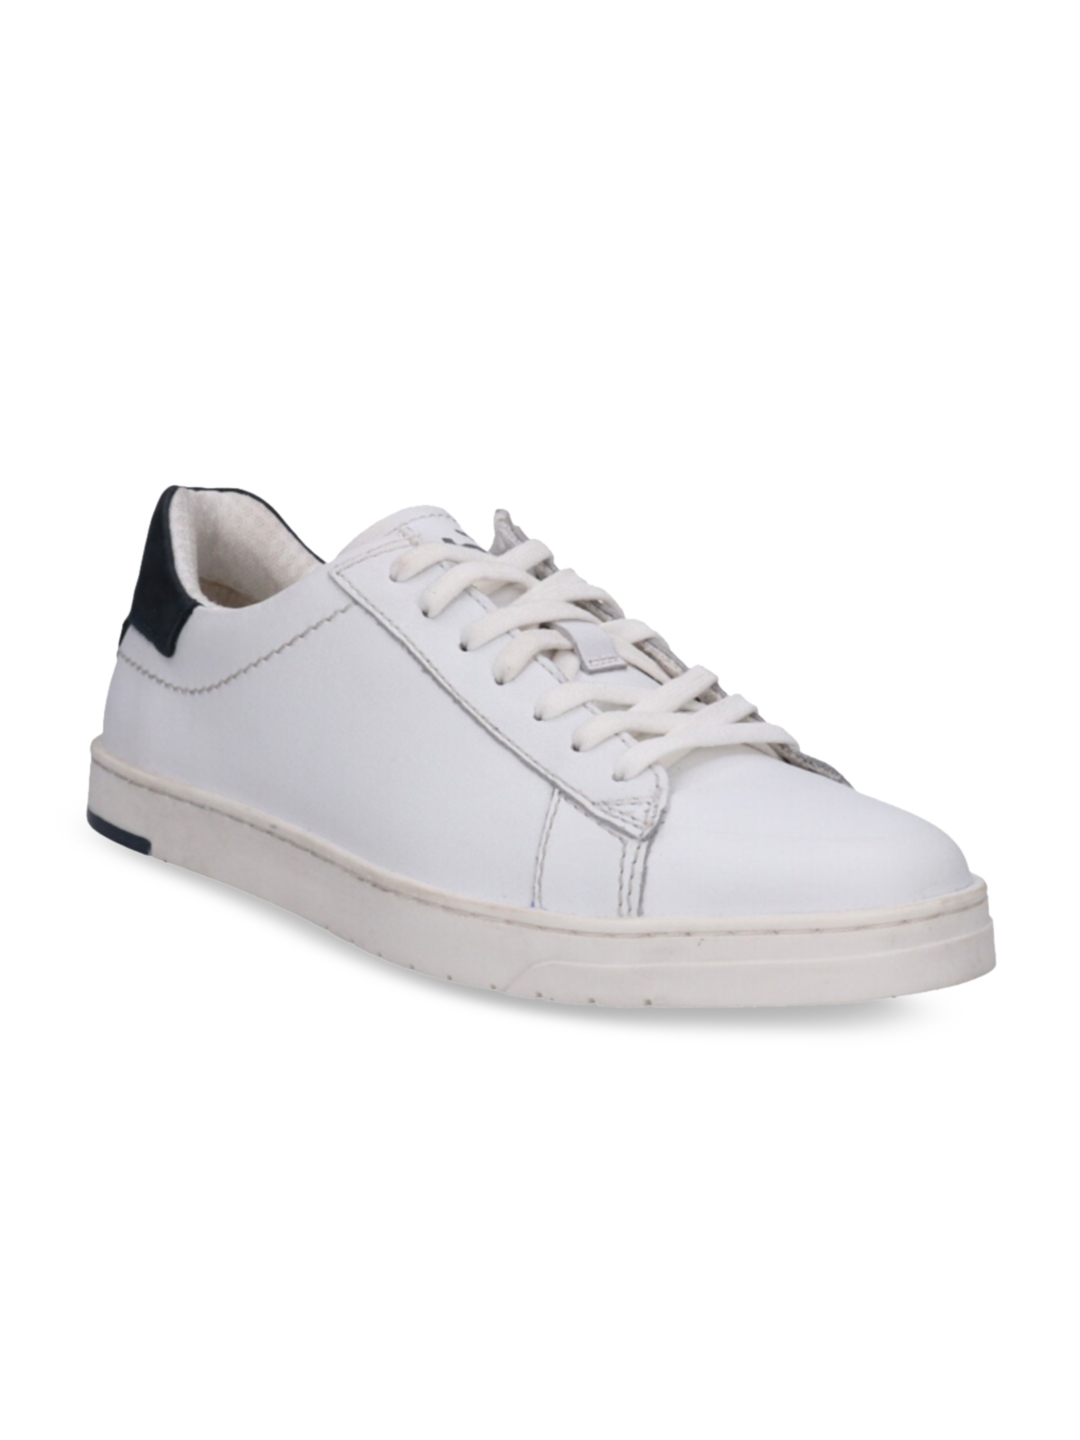 Buy Bugatti Men White Leather Sneakers - Casual Shoes for Men 16614382 ...